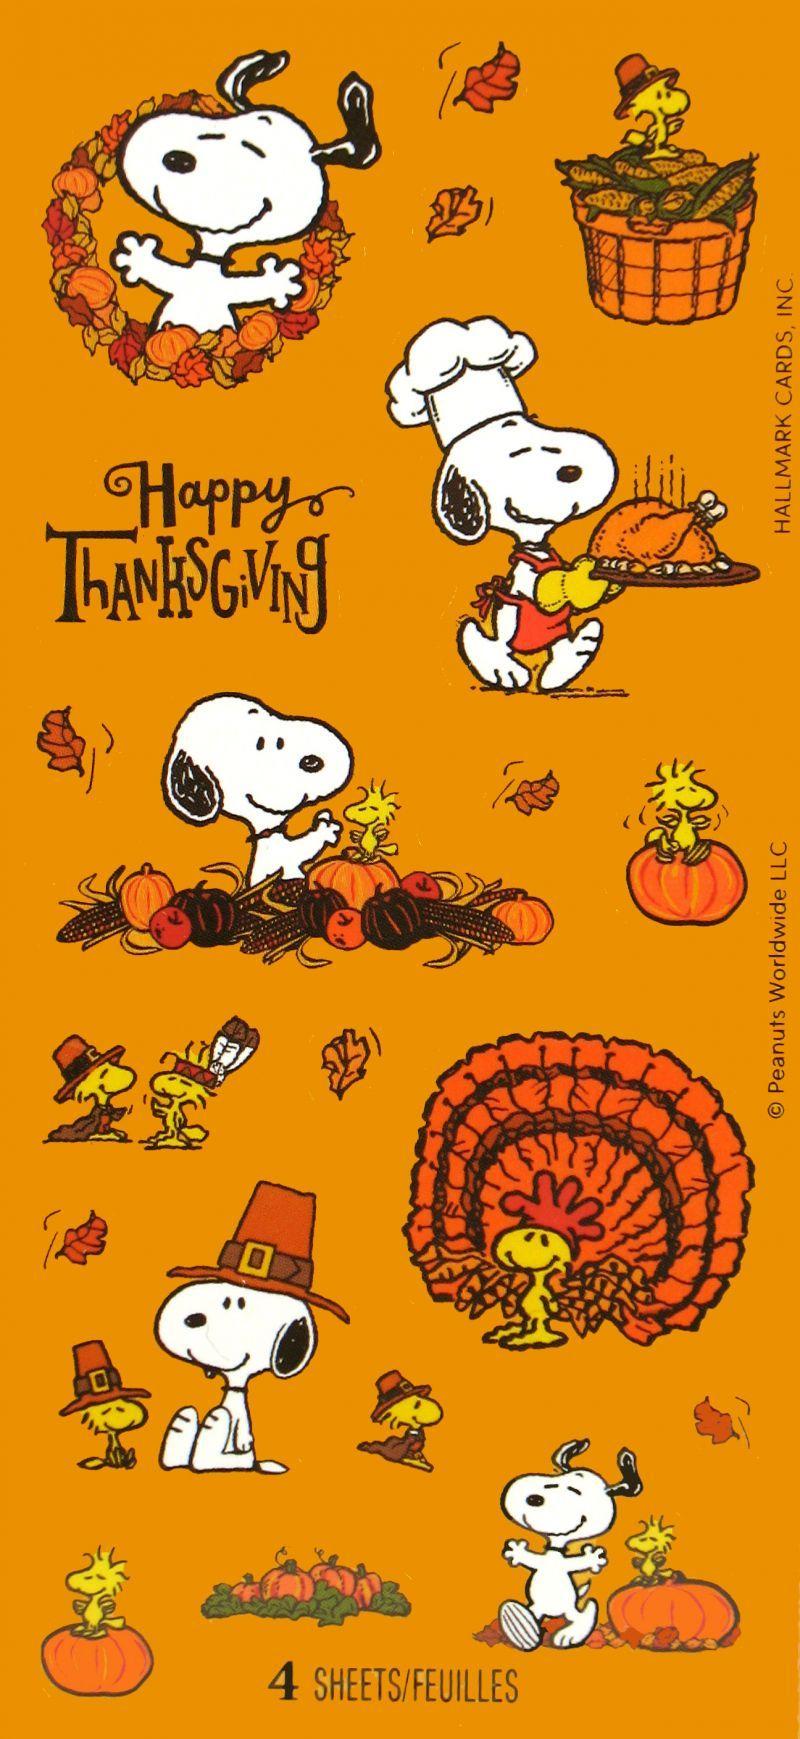 Thanksgiving snoopy, Snoopy wallpaper, Peanuts thanksgiving